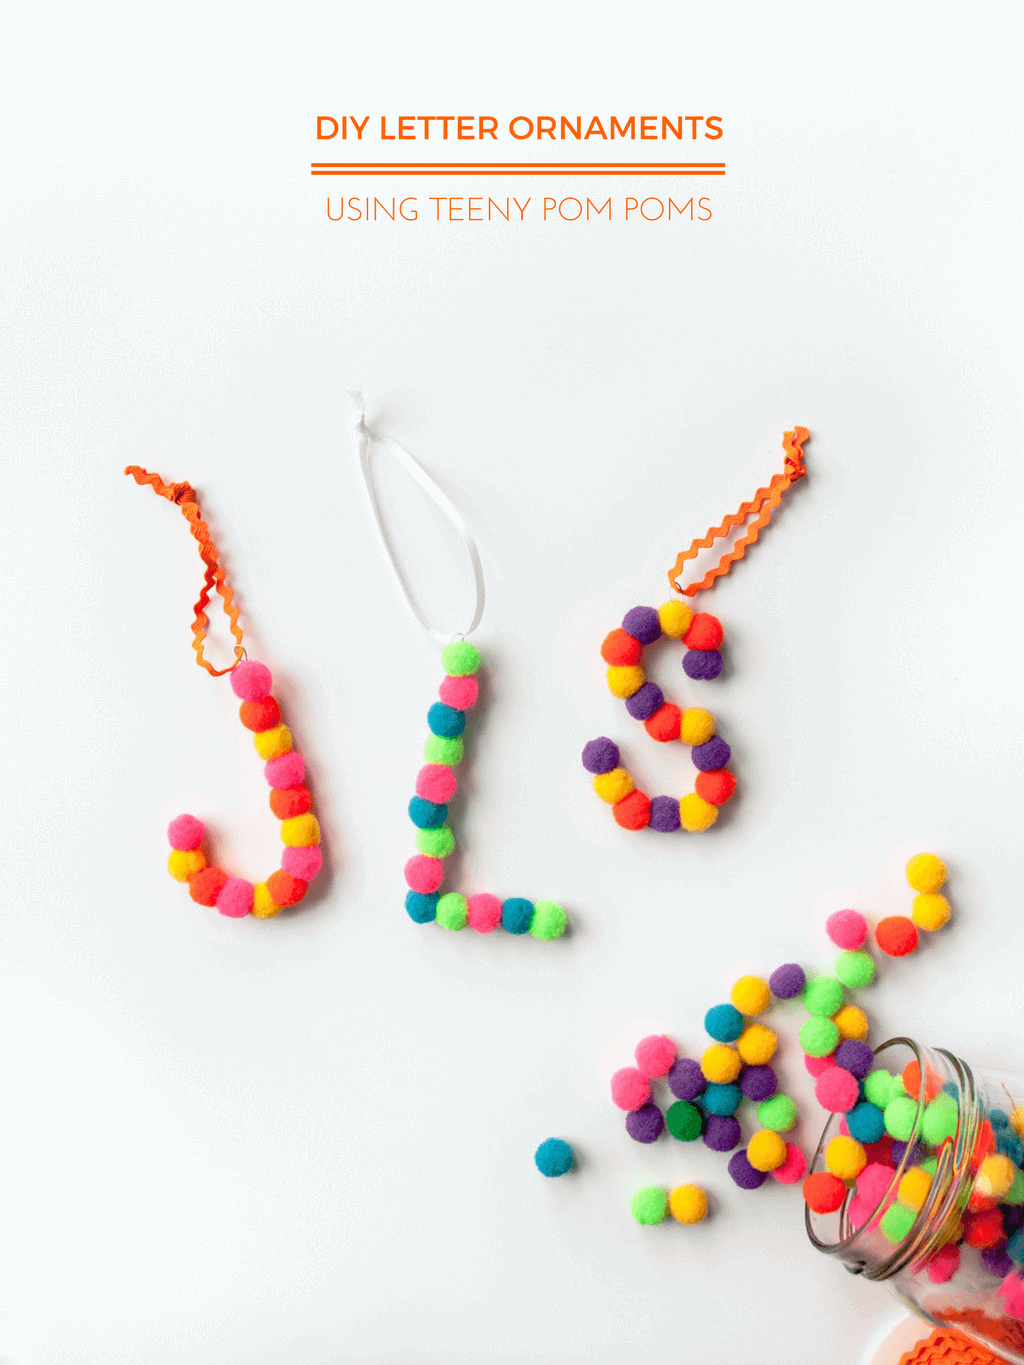 DIY pom pom letter ornaments. Make these easy and merry DIY Christmas ornaments in just an evening | handmade Christmas ornament | DIY Christmas gift | initial ornaments | monogram ornaments #christmasornament #handmadechristmas #pompoms